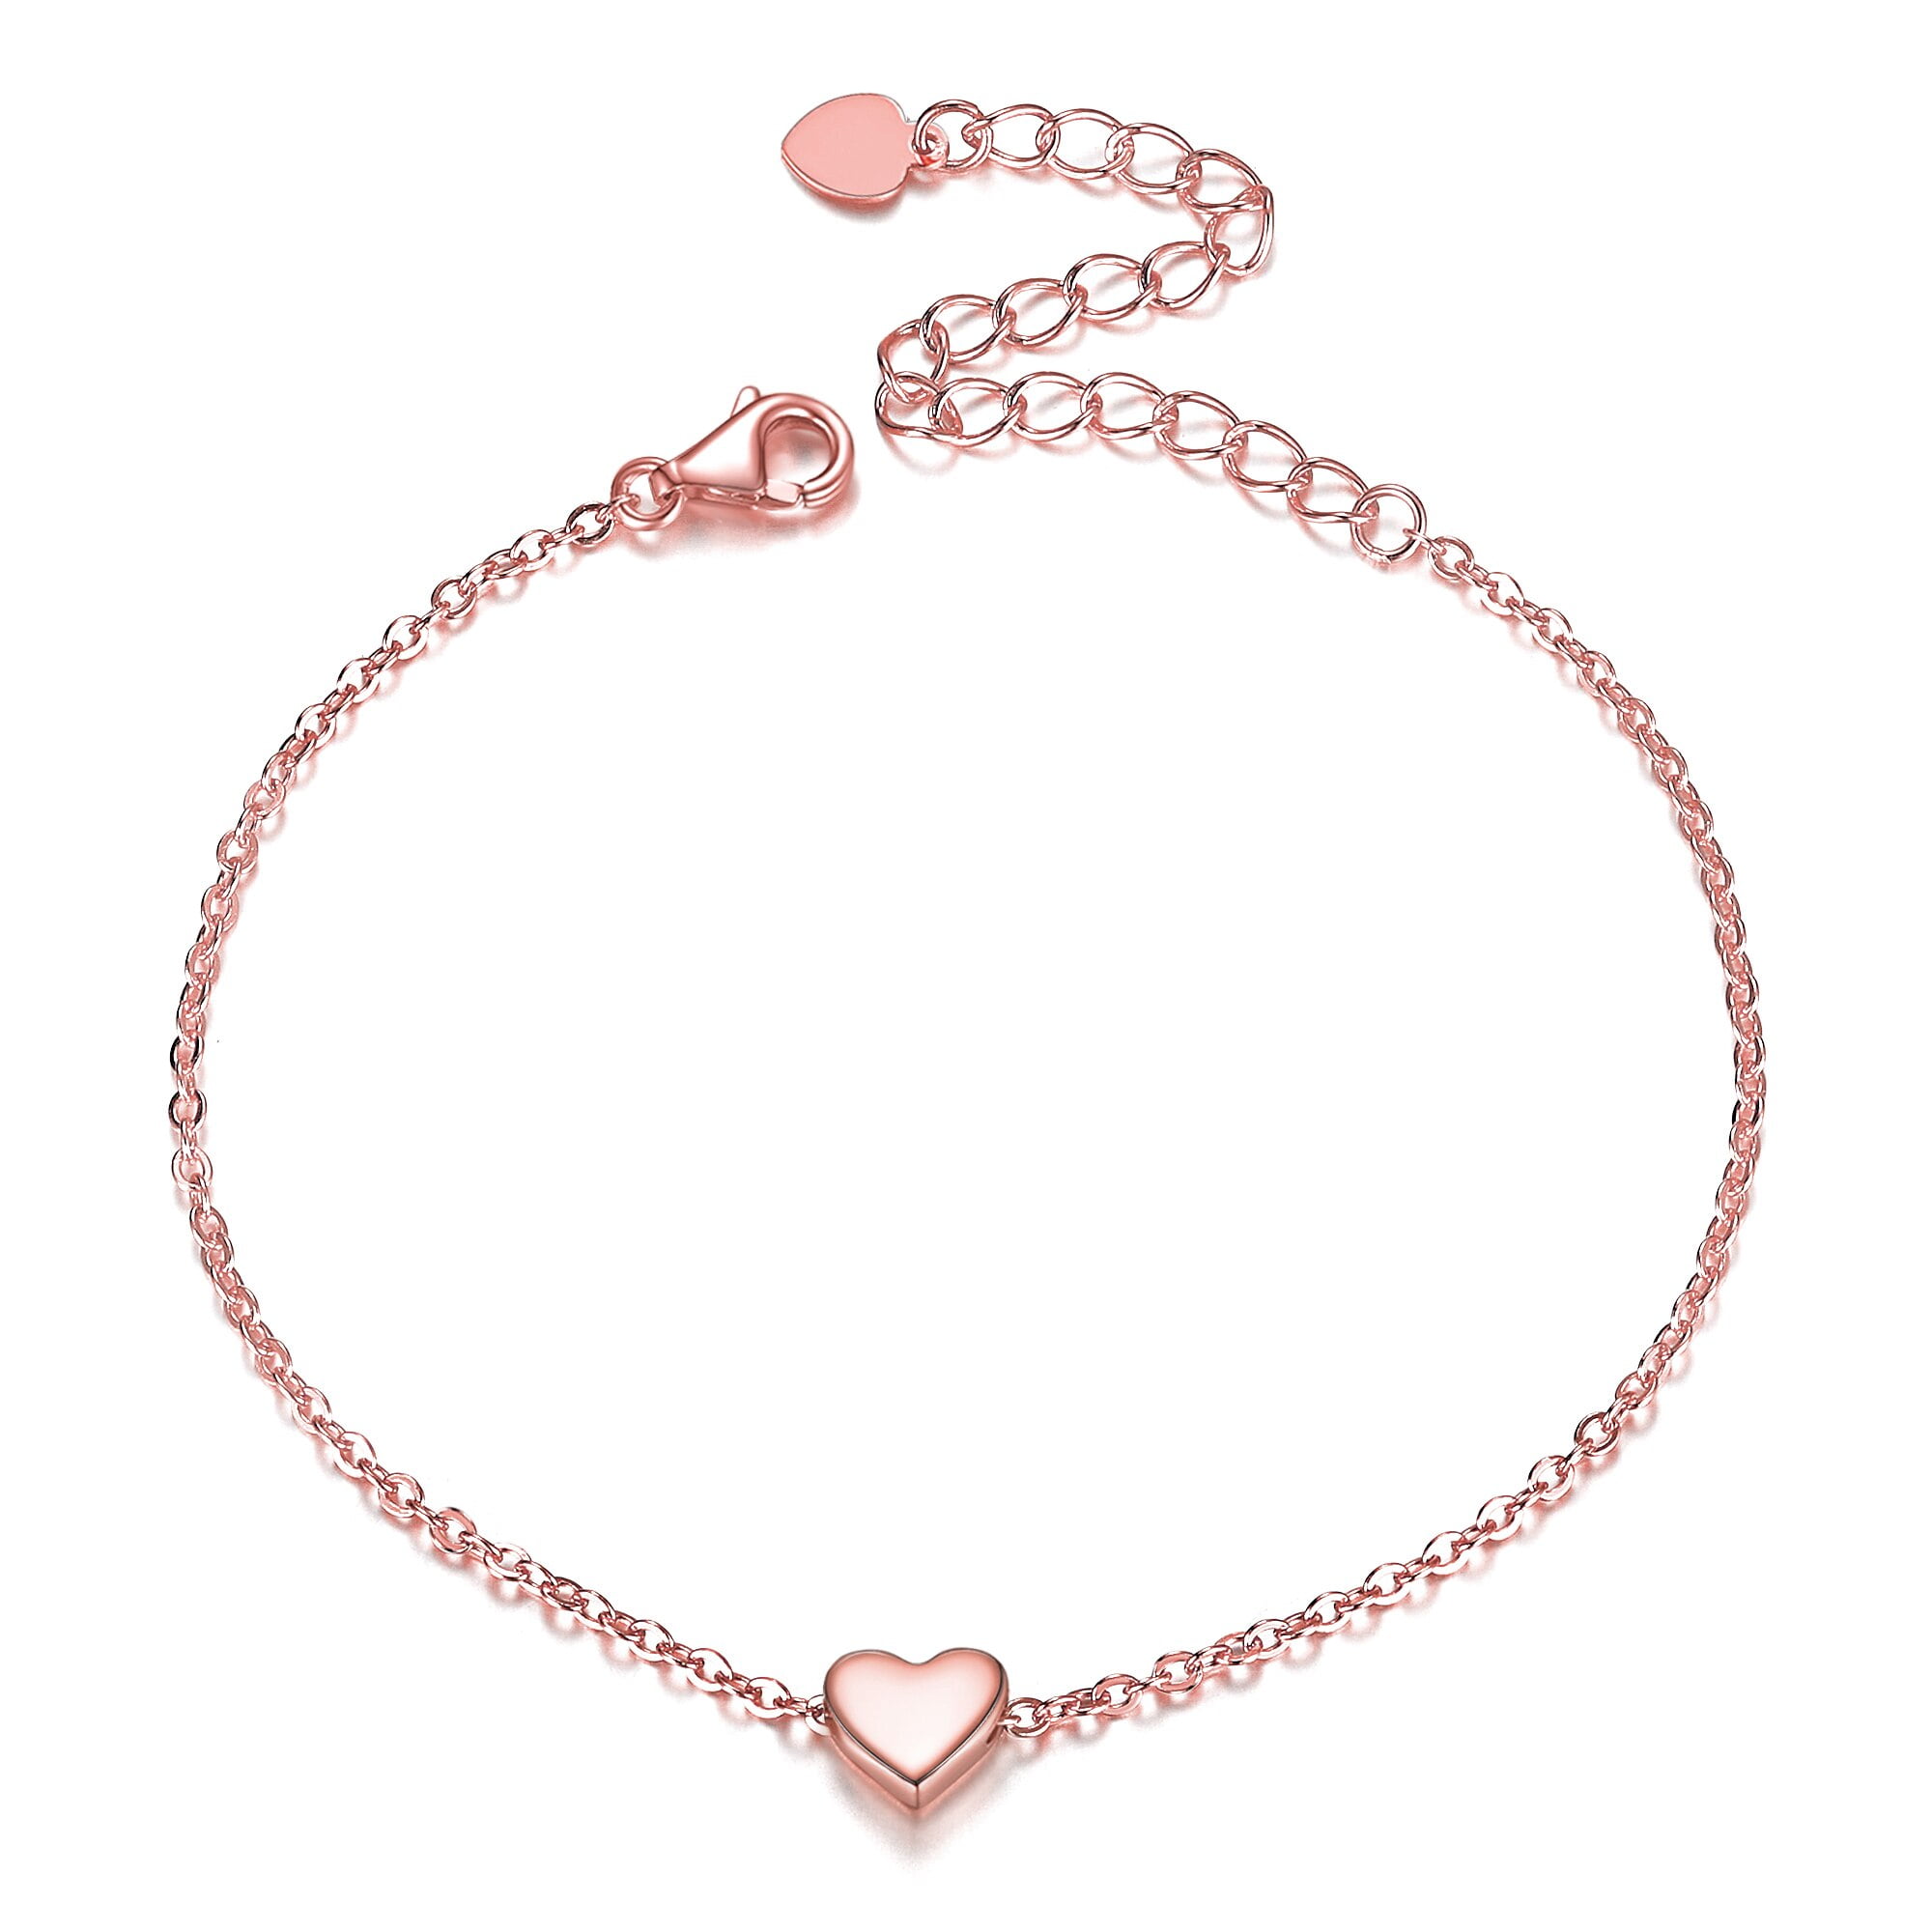 Charm Bracelet 925 Silver Rose Gold Charms Bead For European Bracelets  Bella Pendant Accessories Bangle Valentine Gift Diy Wedding Jewelry From  Fcxtrading, $9.54